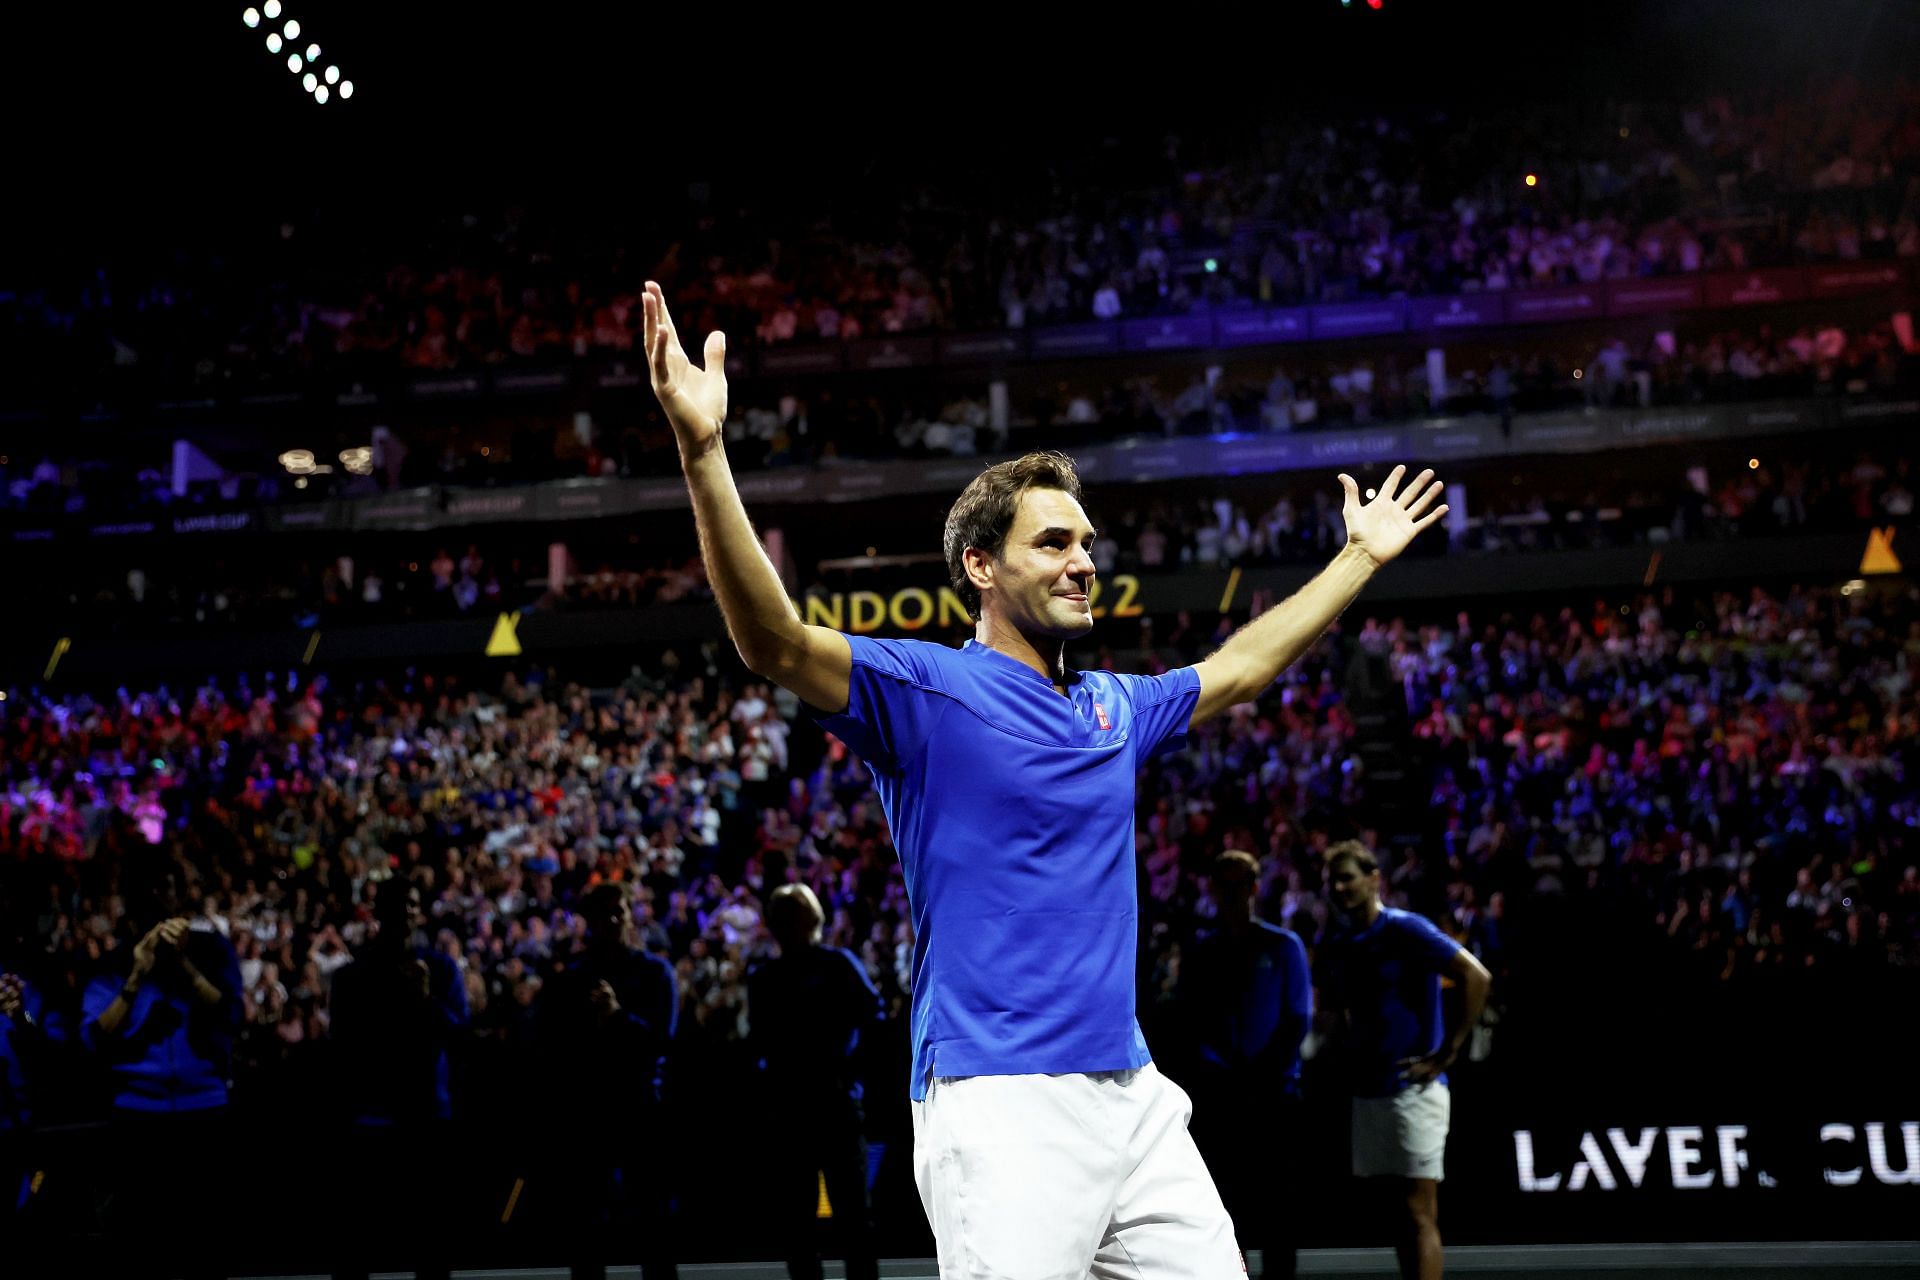 The 20-time Grand Slam champion waves to fans at the Laver Cup 2022.